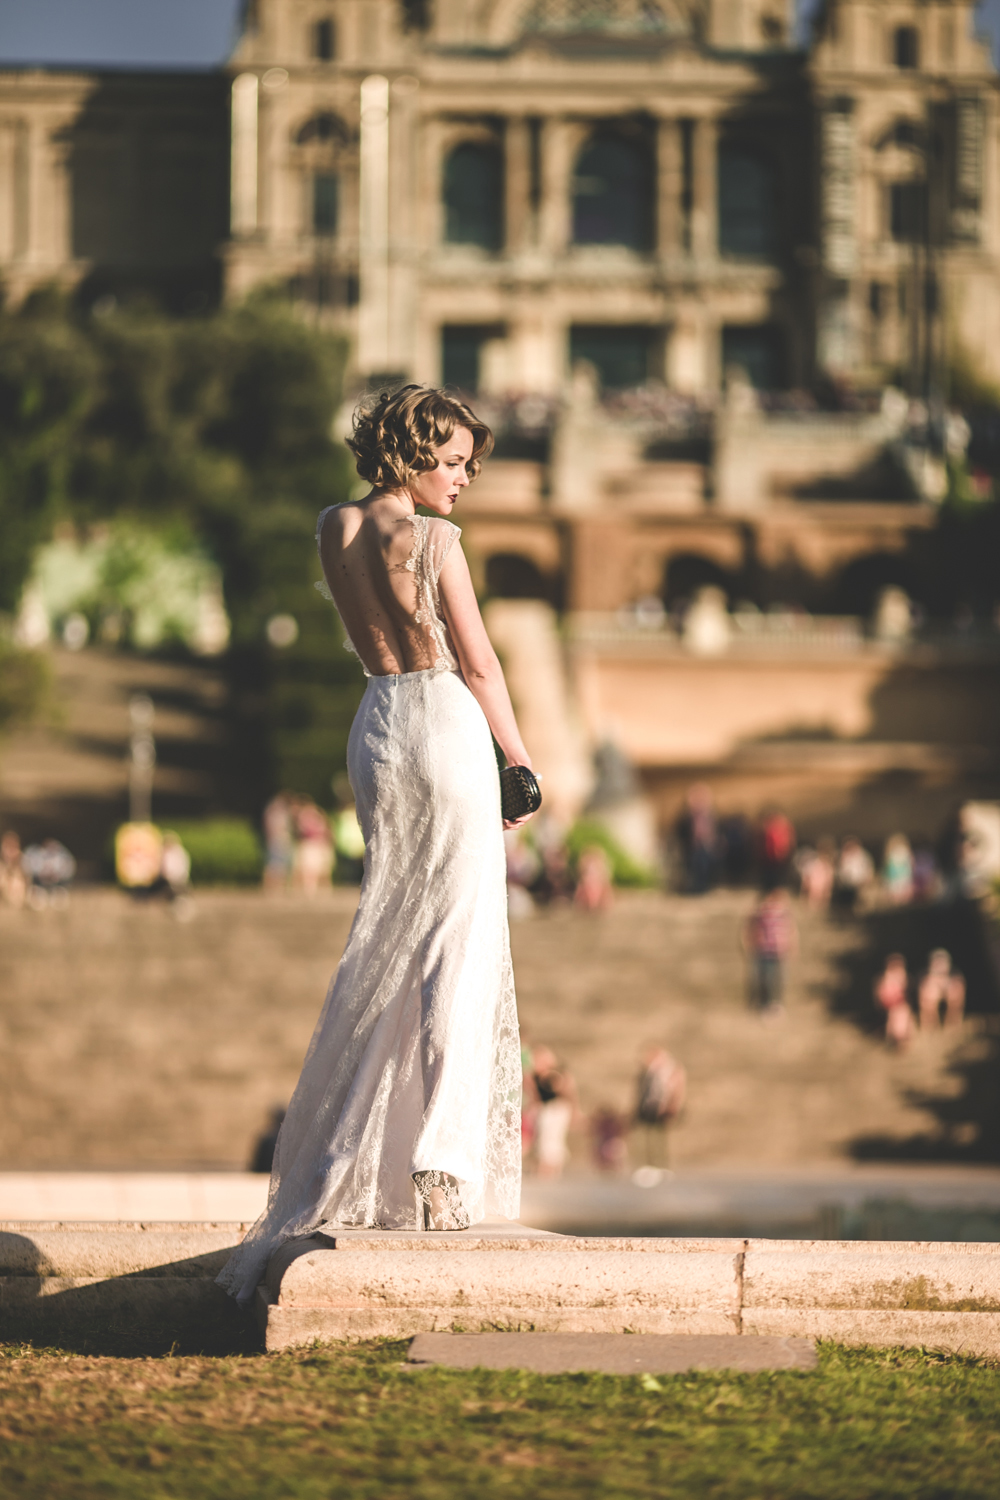 darya kamalova fashion blogger from thecablook in trip in Barcelona Spain with Pronovias 2015 wedding dresses collection catwalk wearing uel camilo white gown bottega veneta knot clutch and black lips-2025